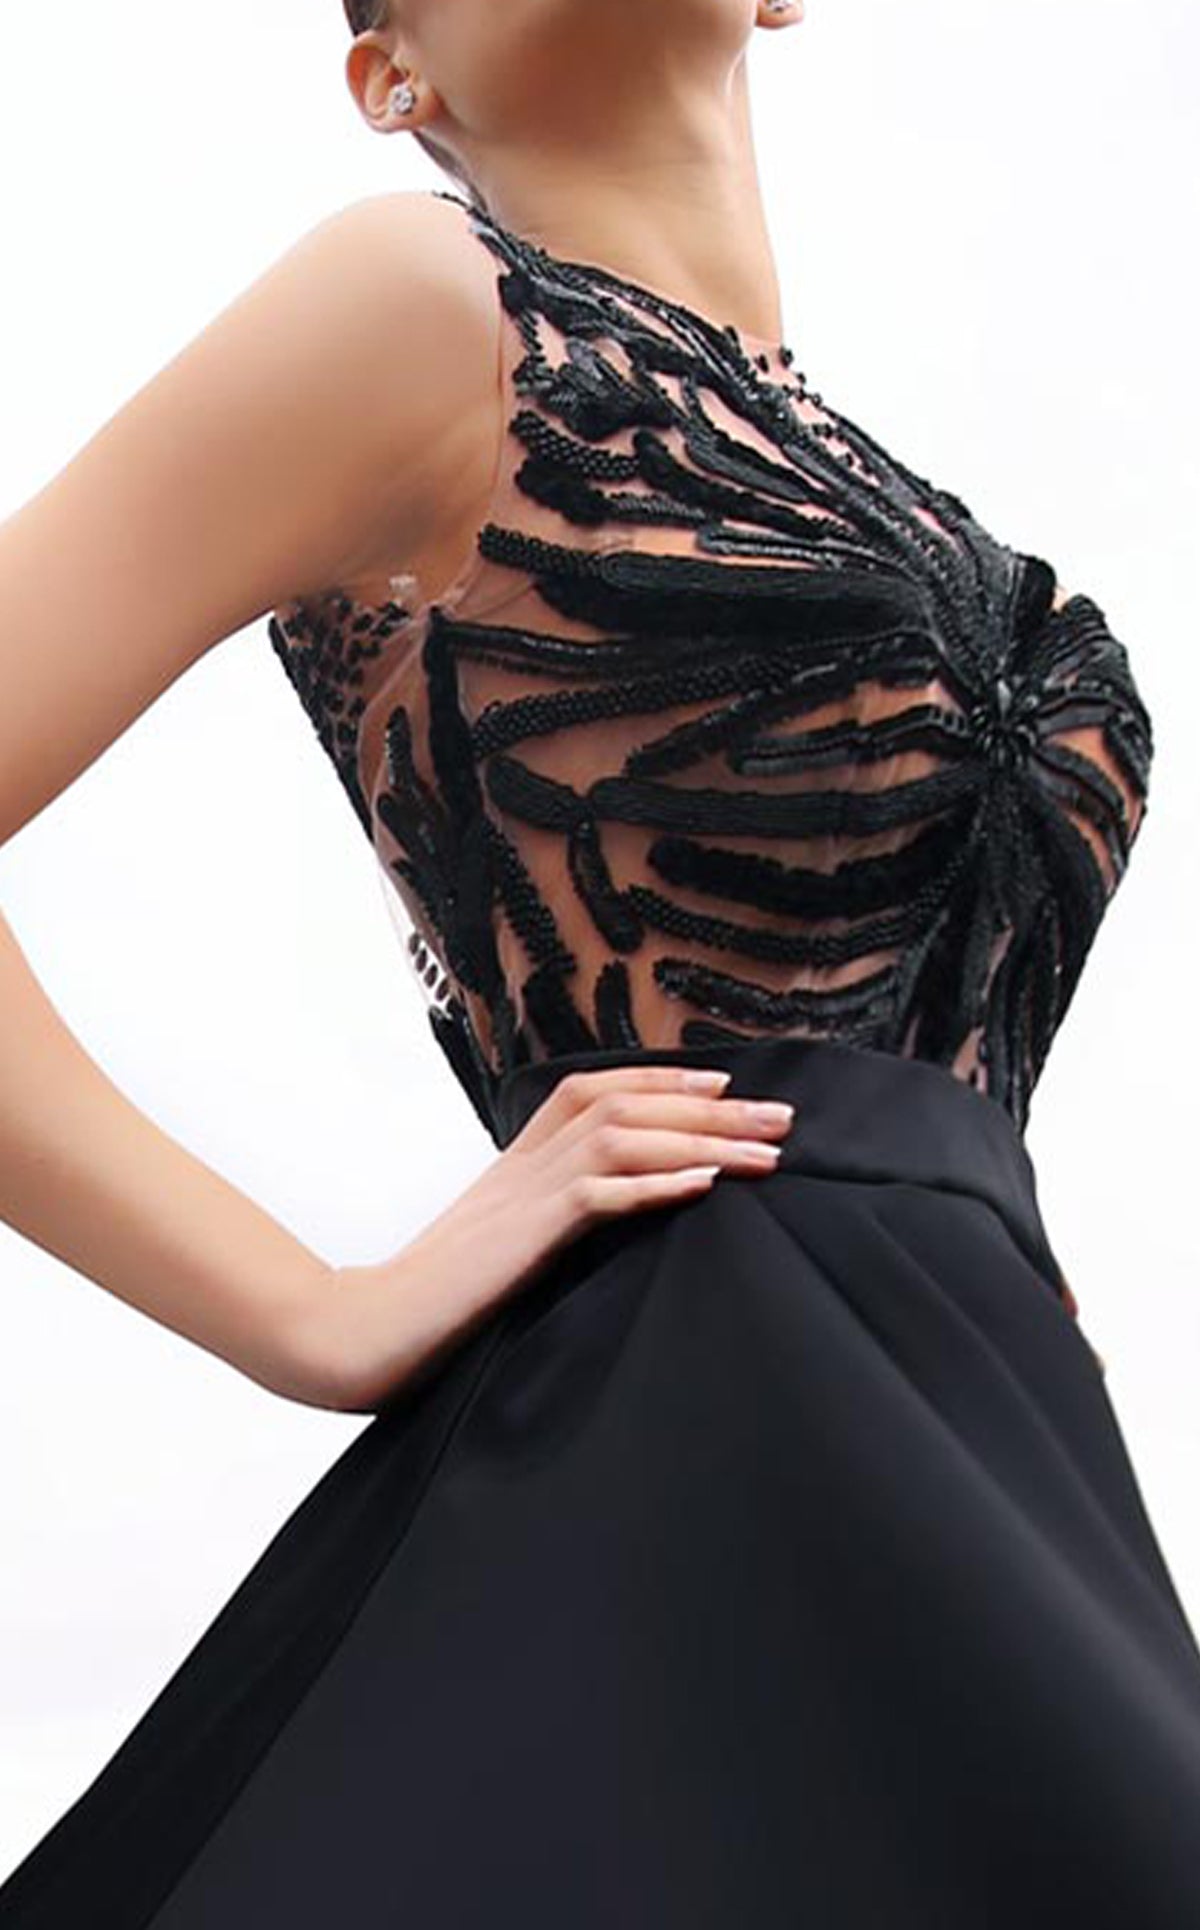 Embellished A-line Gown - Rofial Beauty